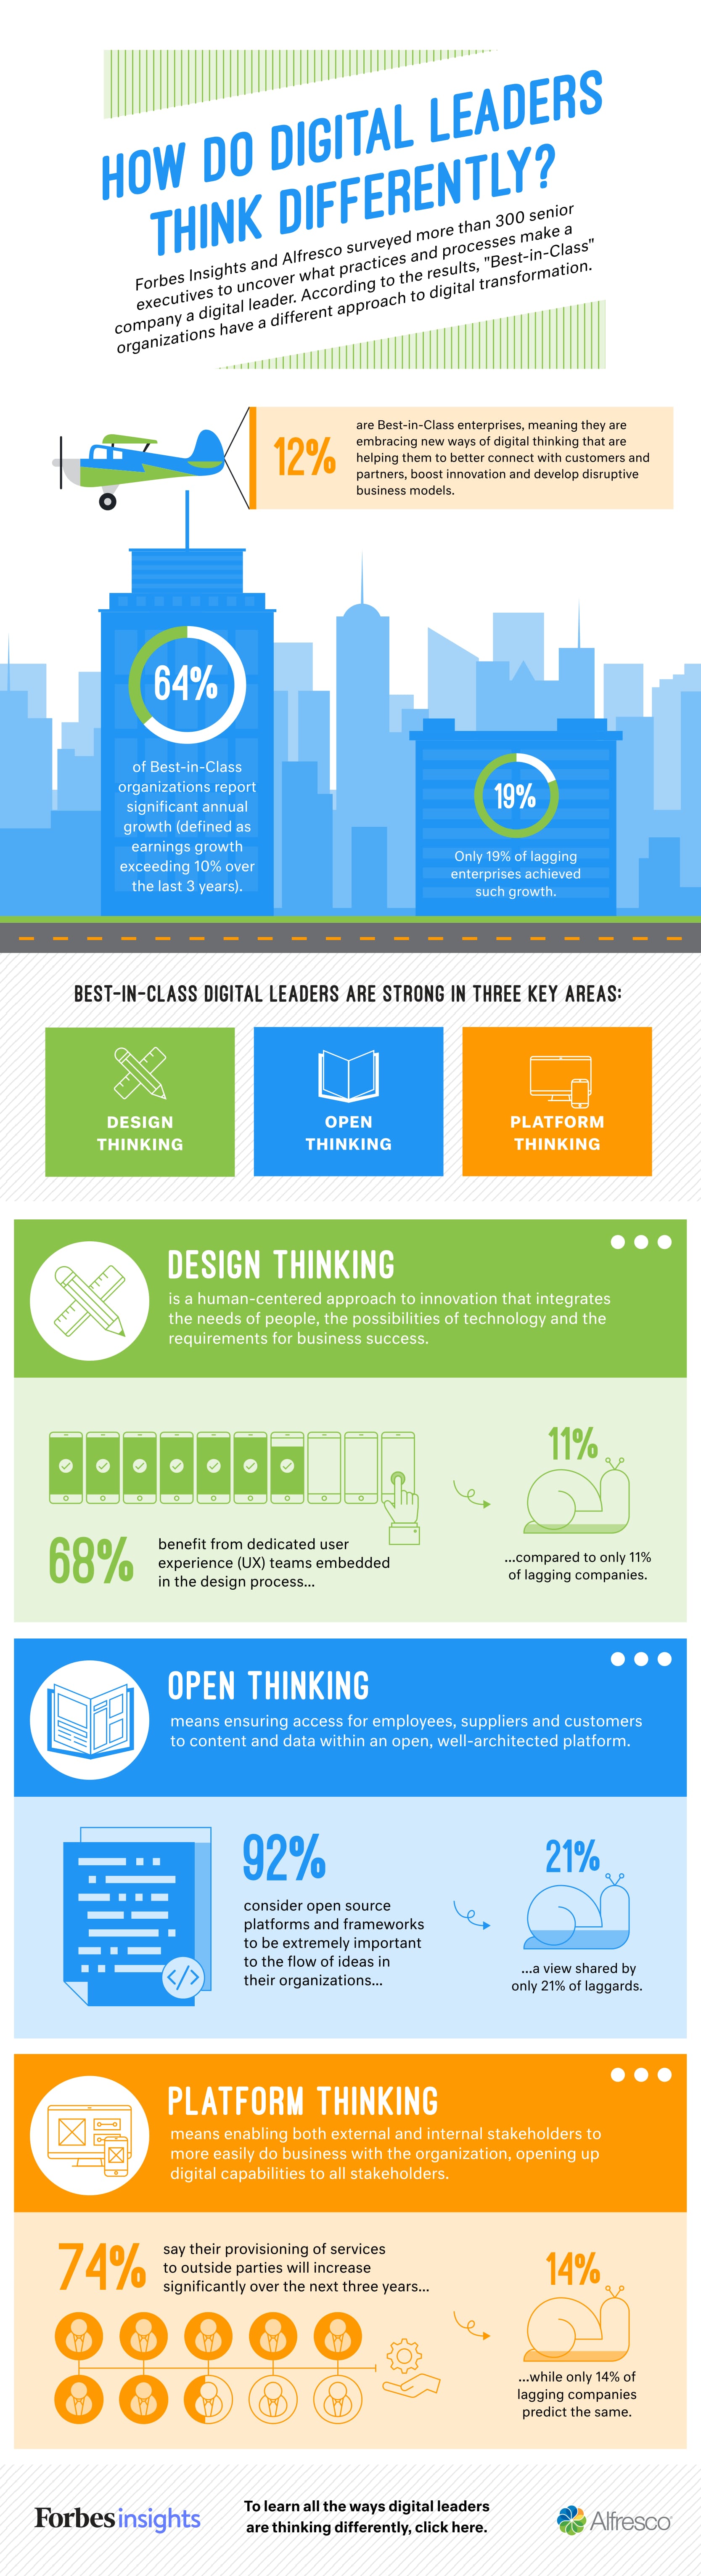 How Do Digital Leaders Think Differently?